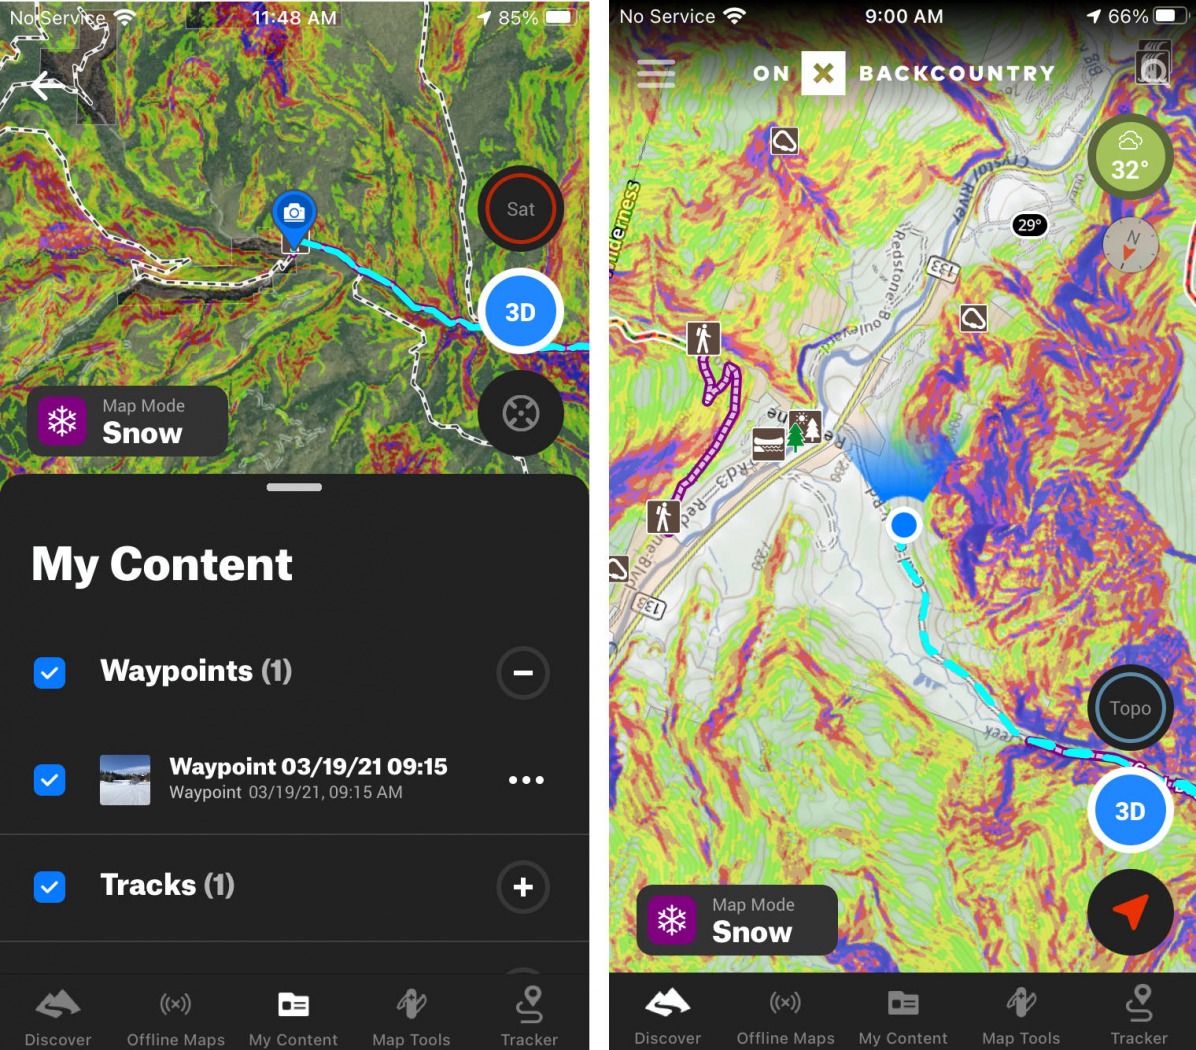 Similar to some other mapping software, you can customize your waypoints with notes and photos. You can also toggle between different direction indicators depending on how you want to orient your compass.